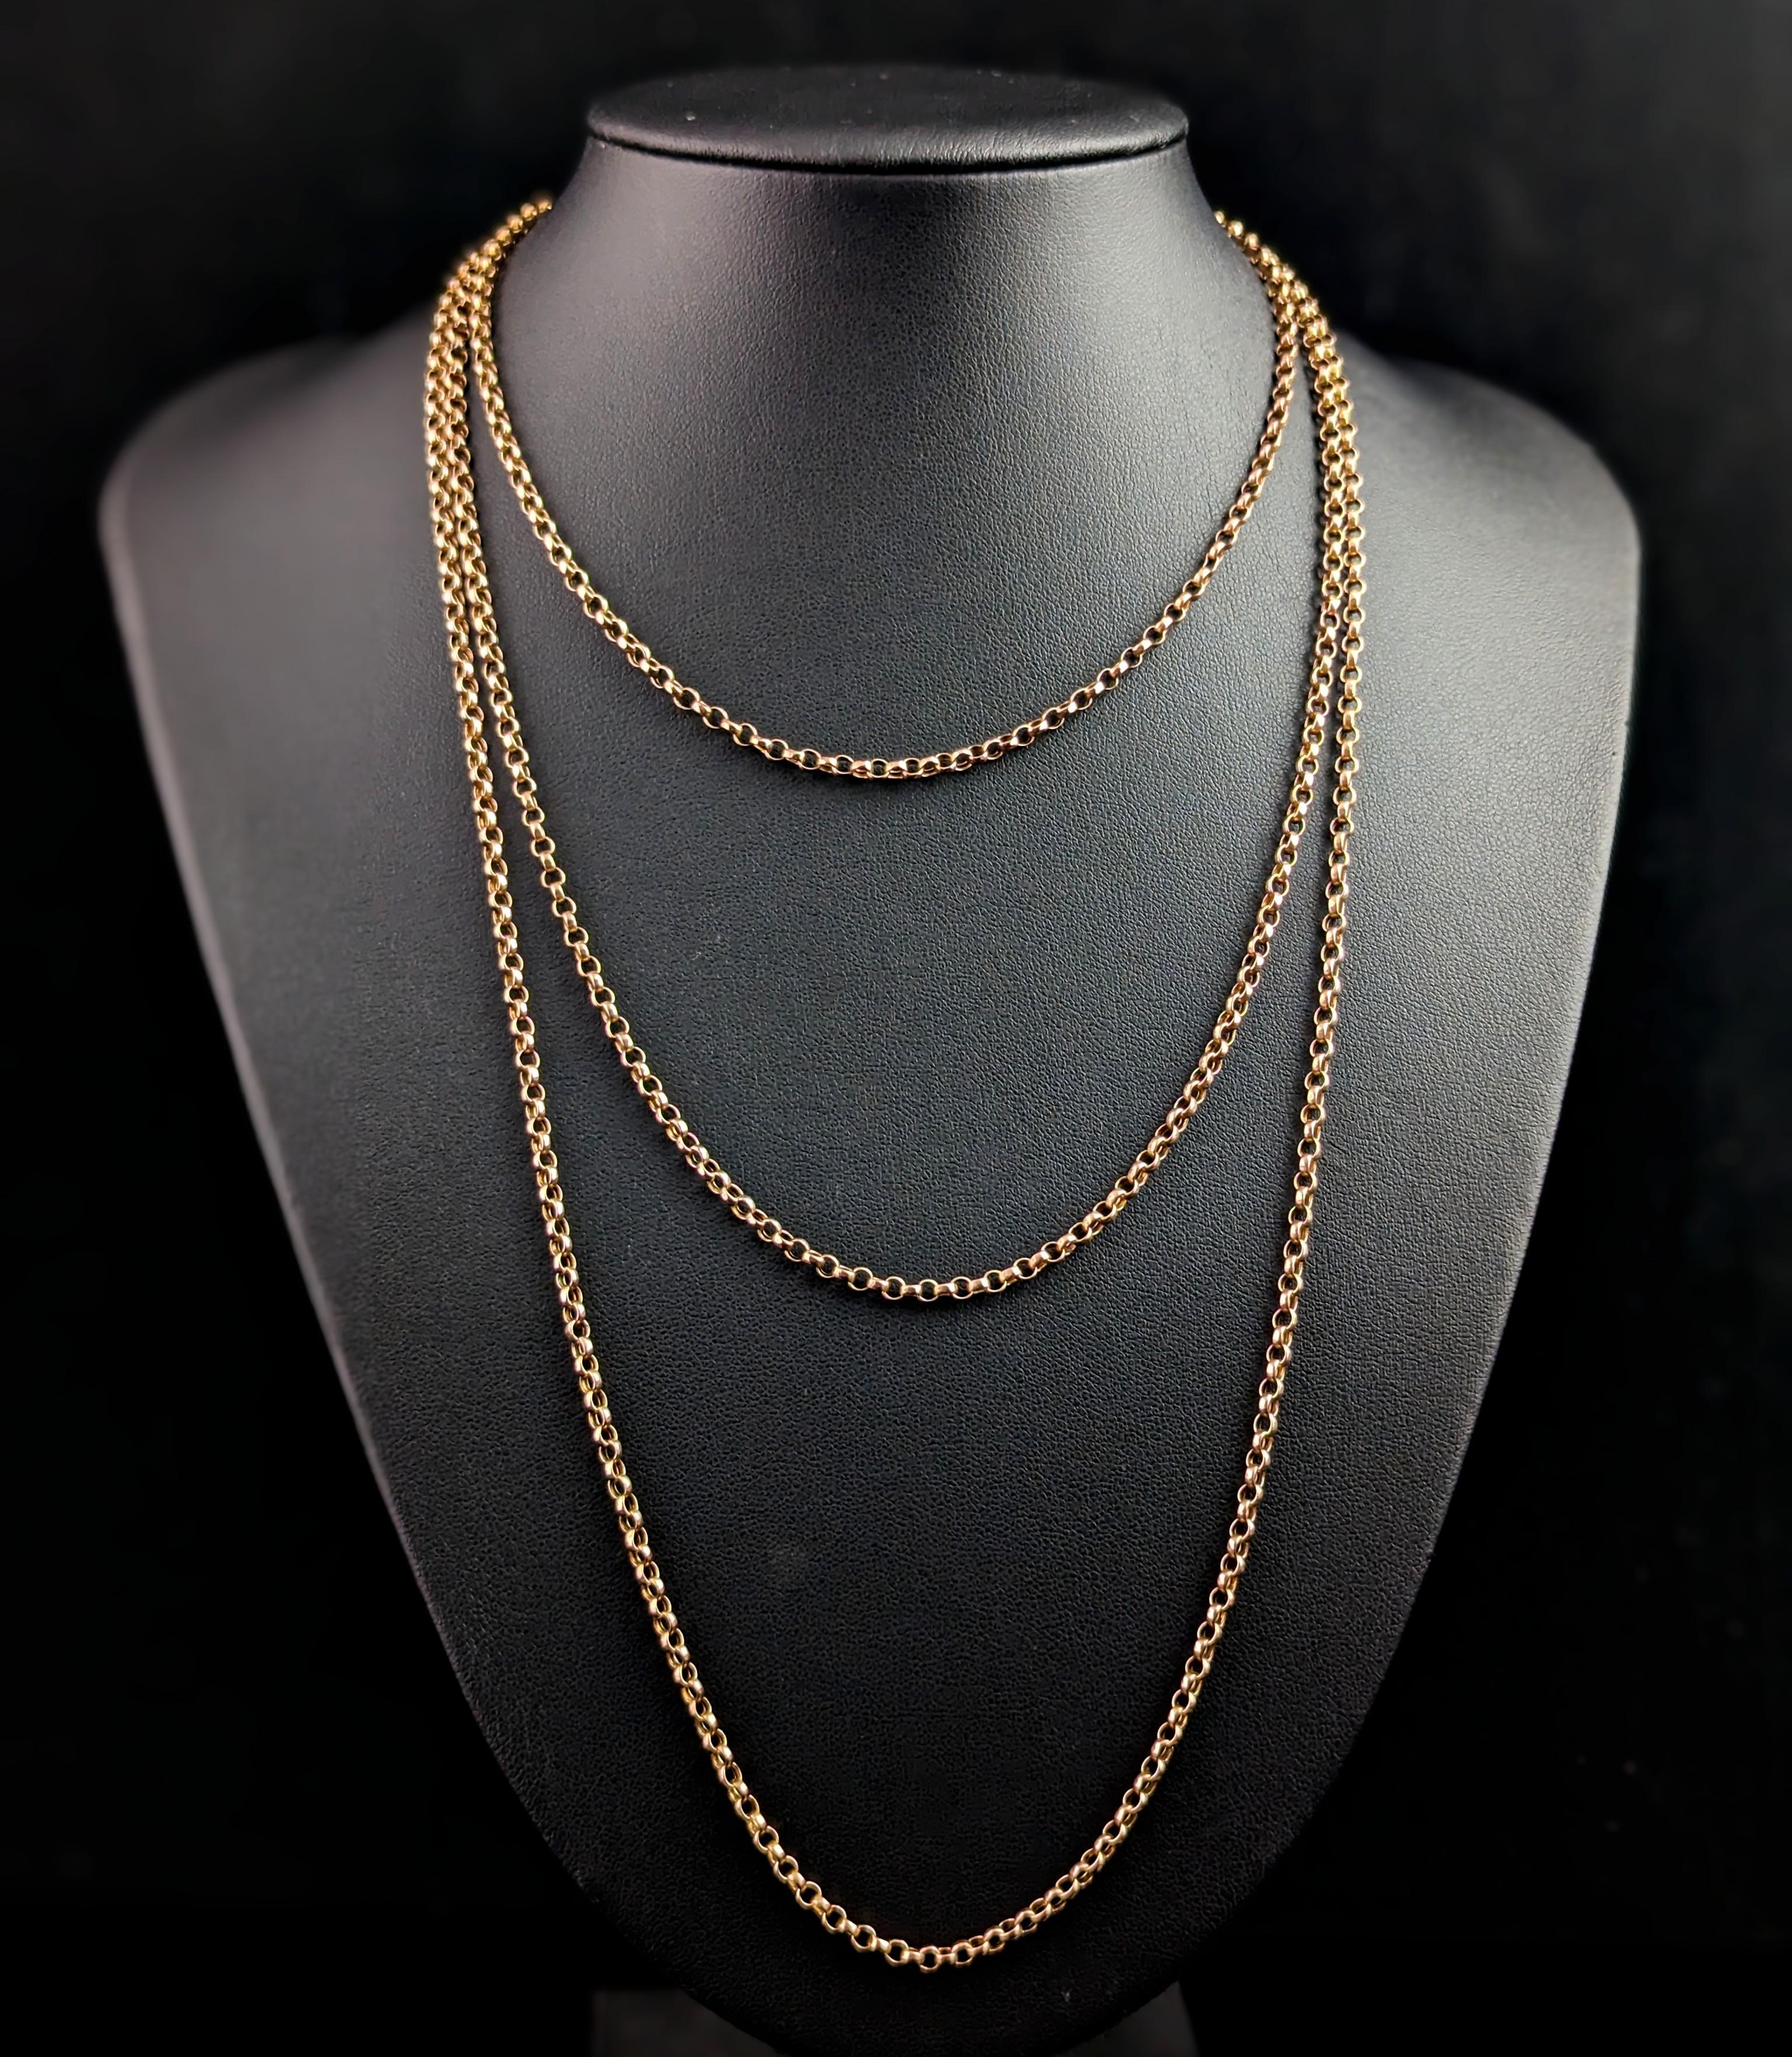 This stunning antique, Victorian 9kt yellow gold longuard chain is sure to fill your jewellery needs!

We love a good longuard chain here, such a versatile and wearable piece of jewellery, this one is no exception.

Stunning oval belcher or rolo